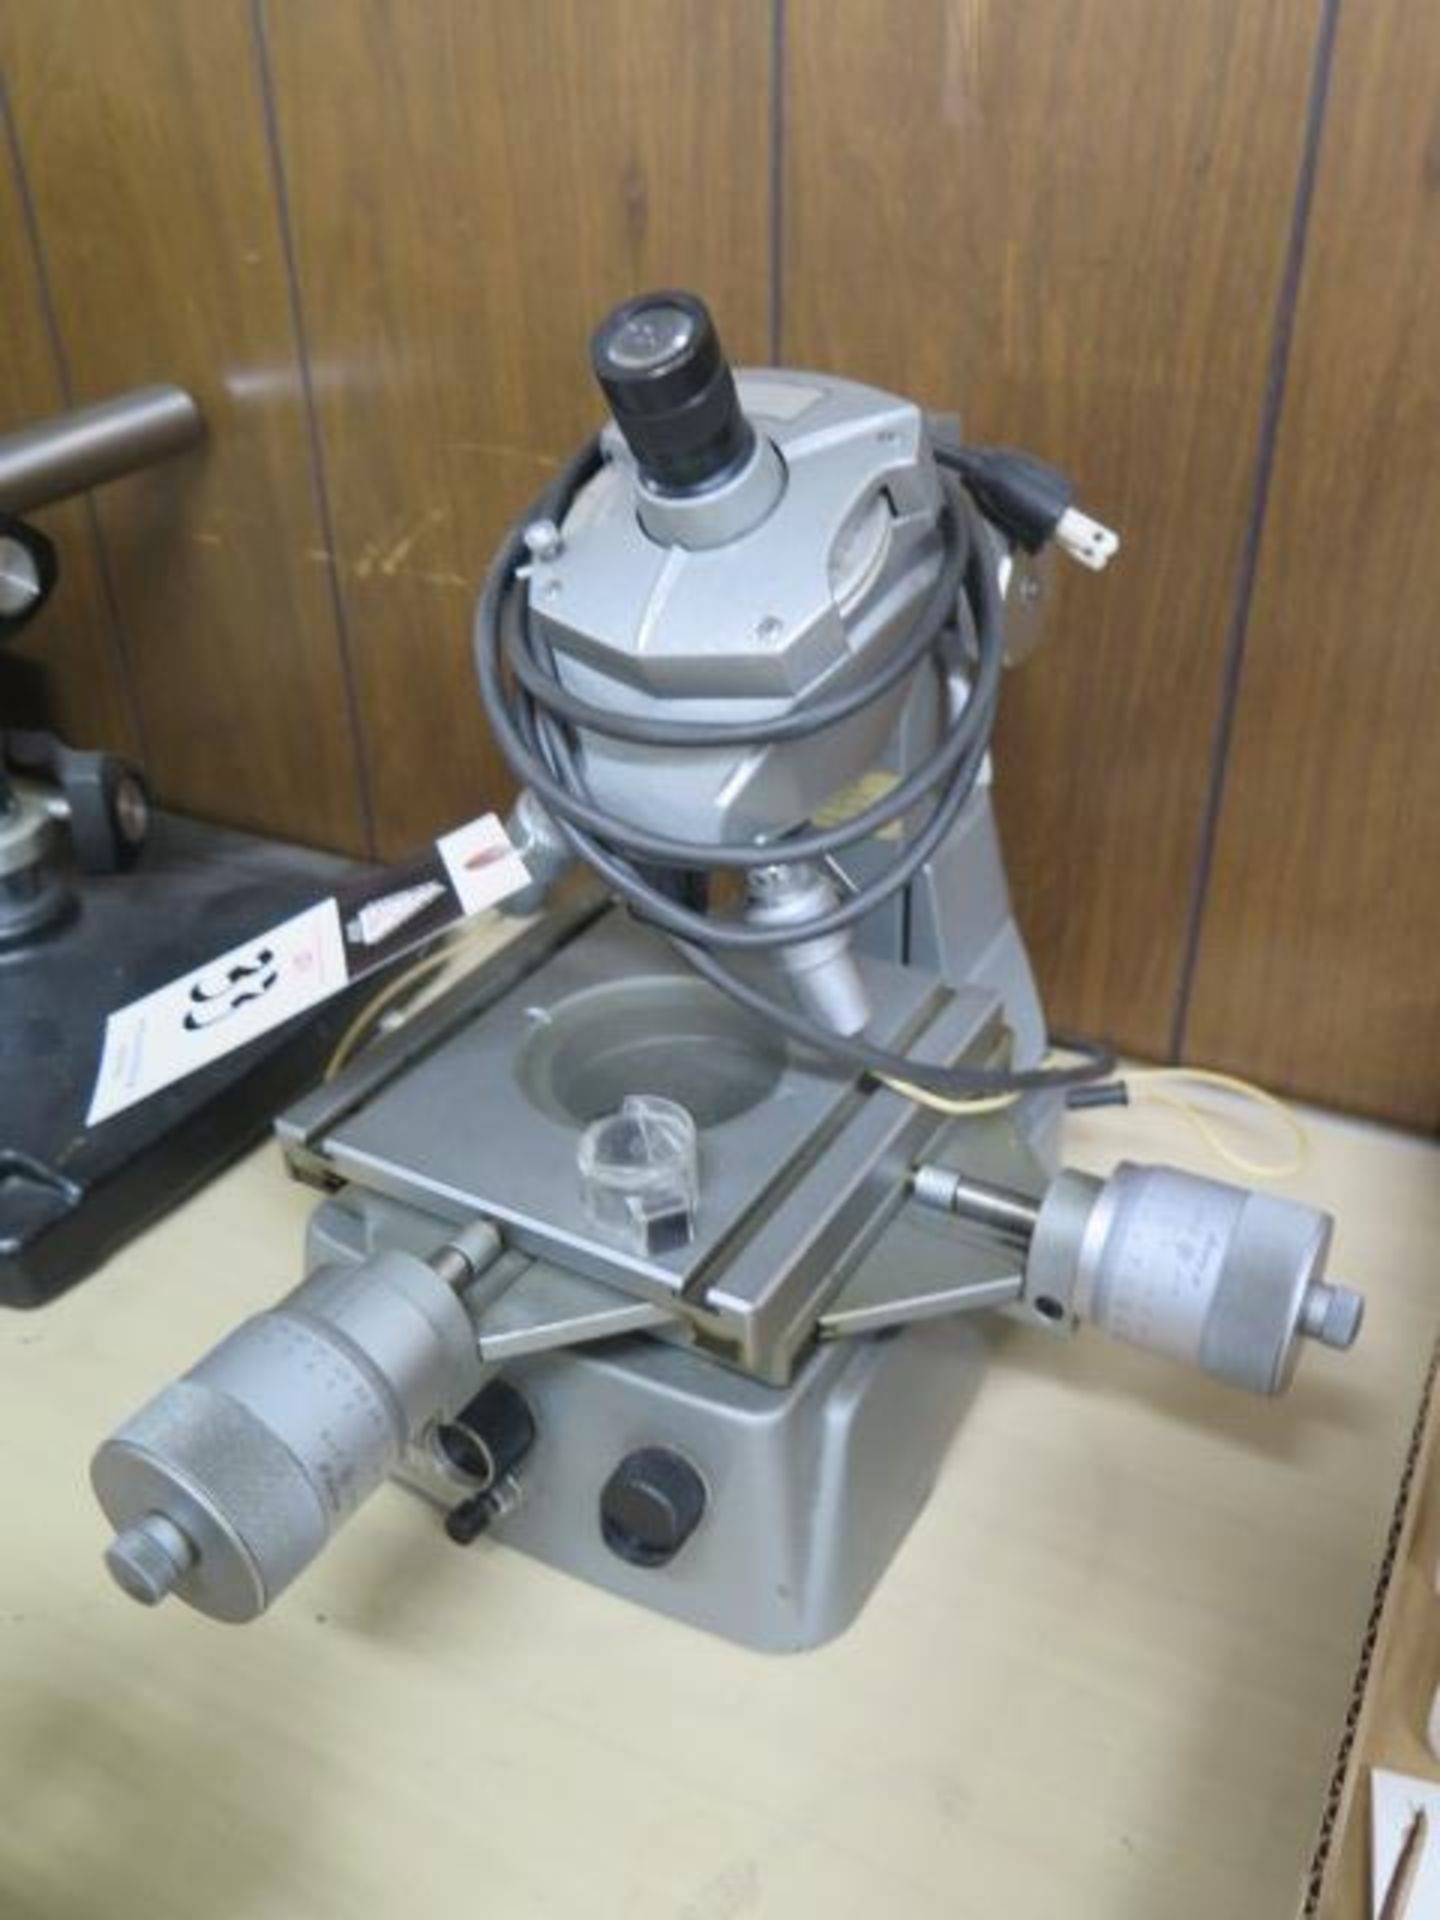 Mitutoyo BI-4 Tool Makers Microscope s/n 4351 w/ Light Source (SOLD AS-IS - NO WARRANTY) - Image 2 of 9